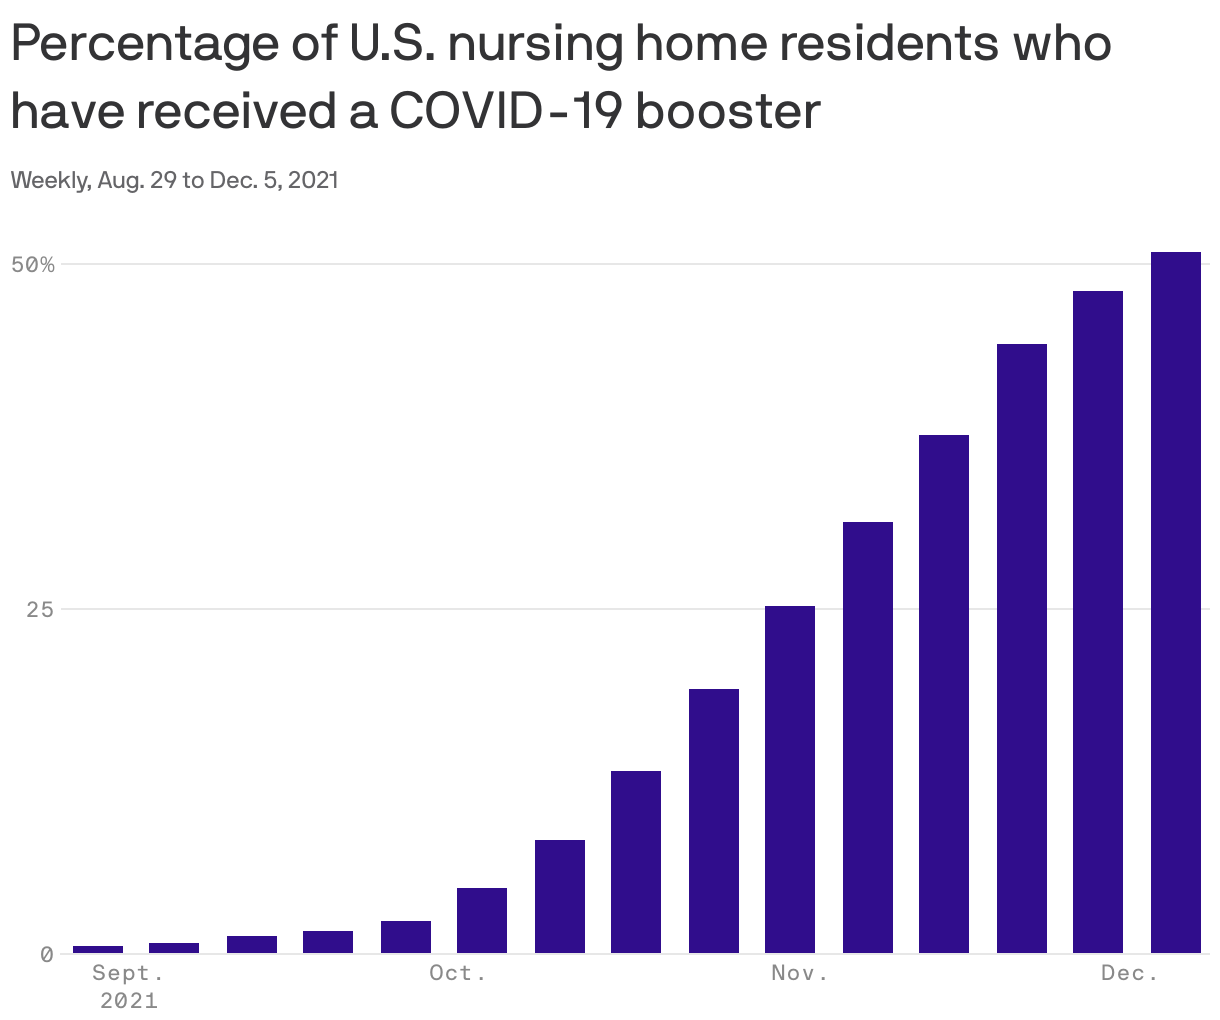 Percentage of U.S. nursing home residents who have received a COVID-19 booster